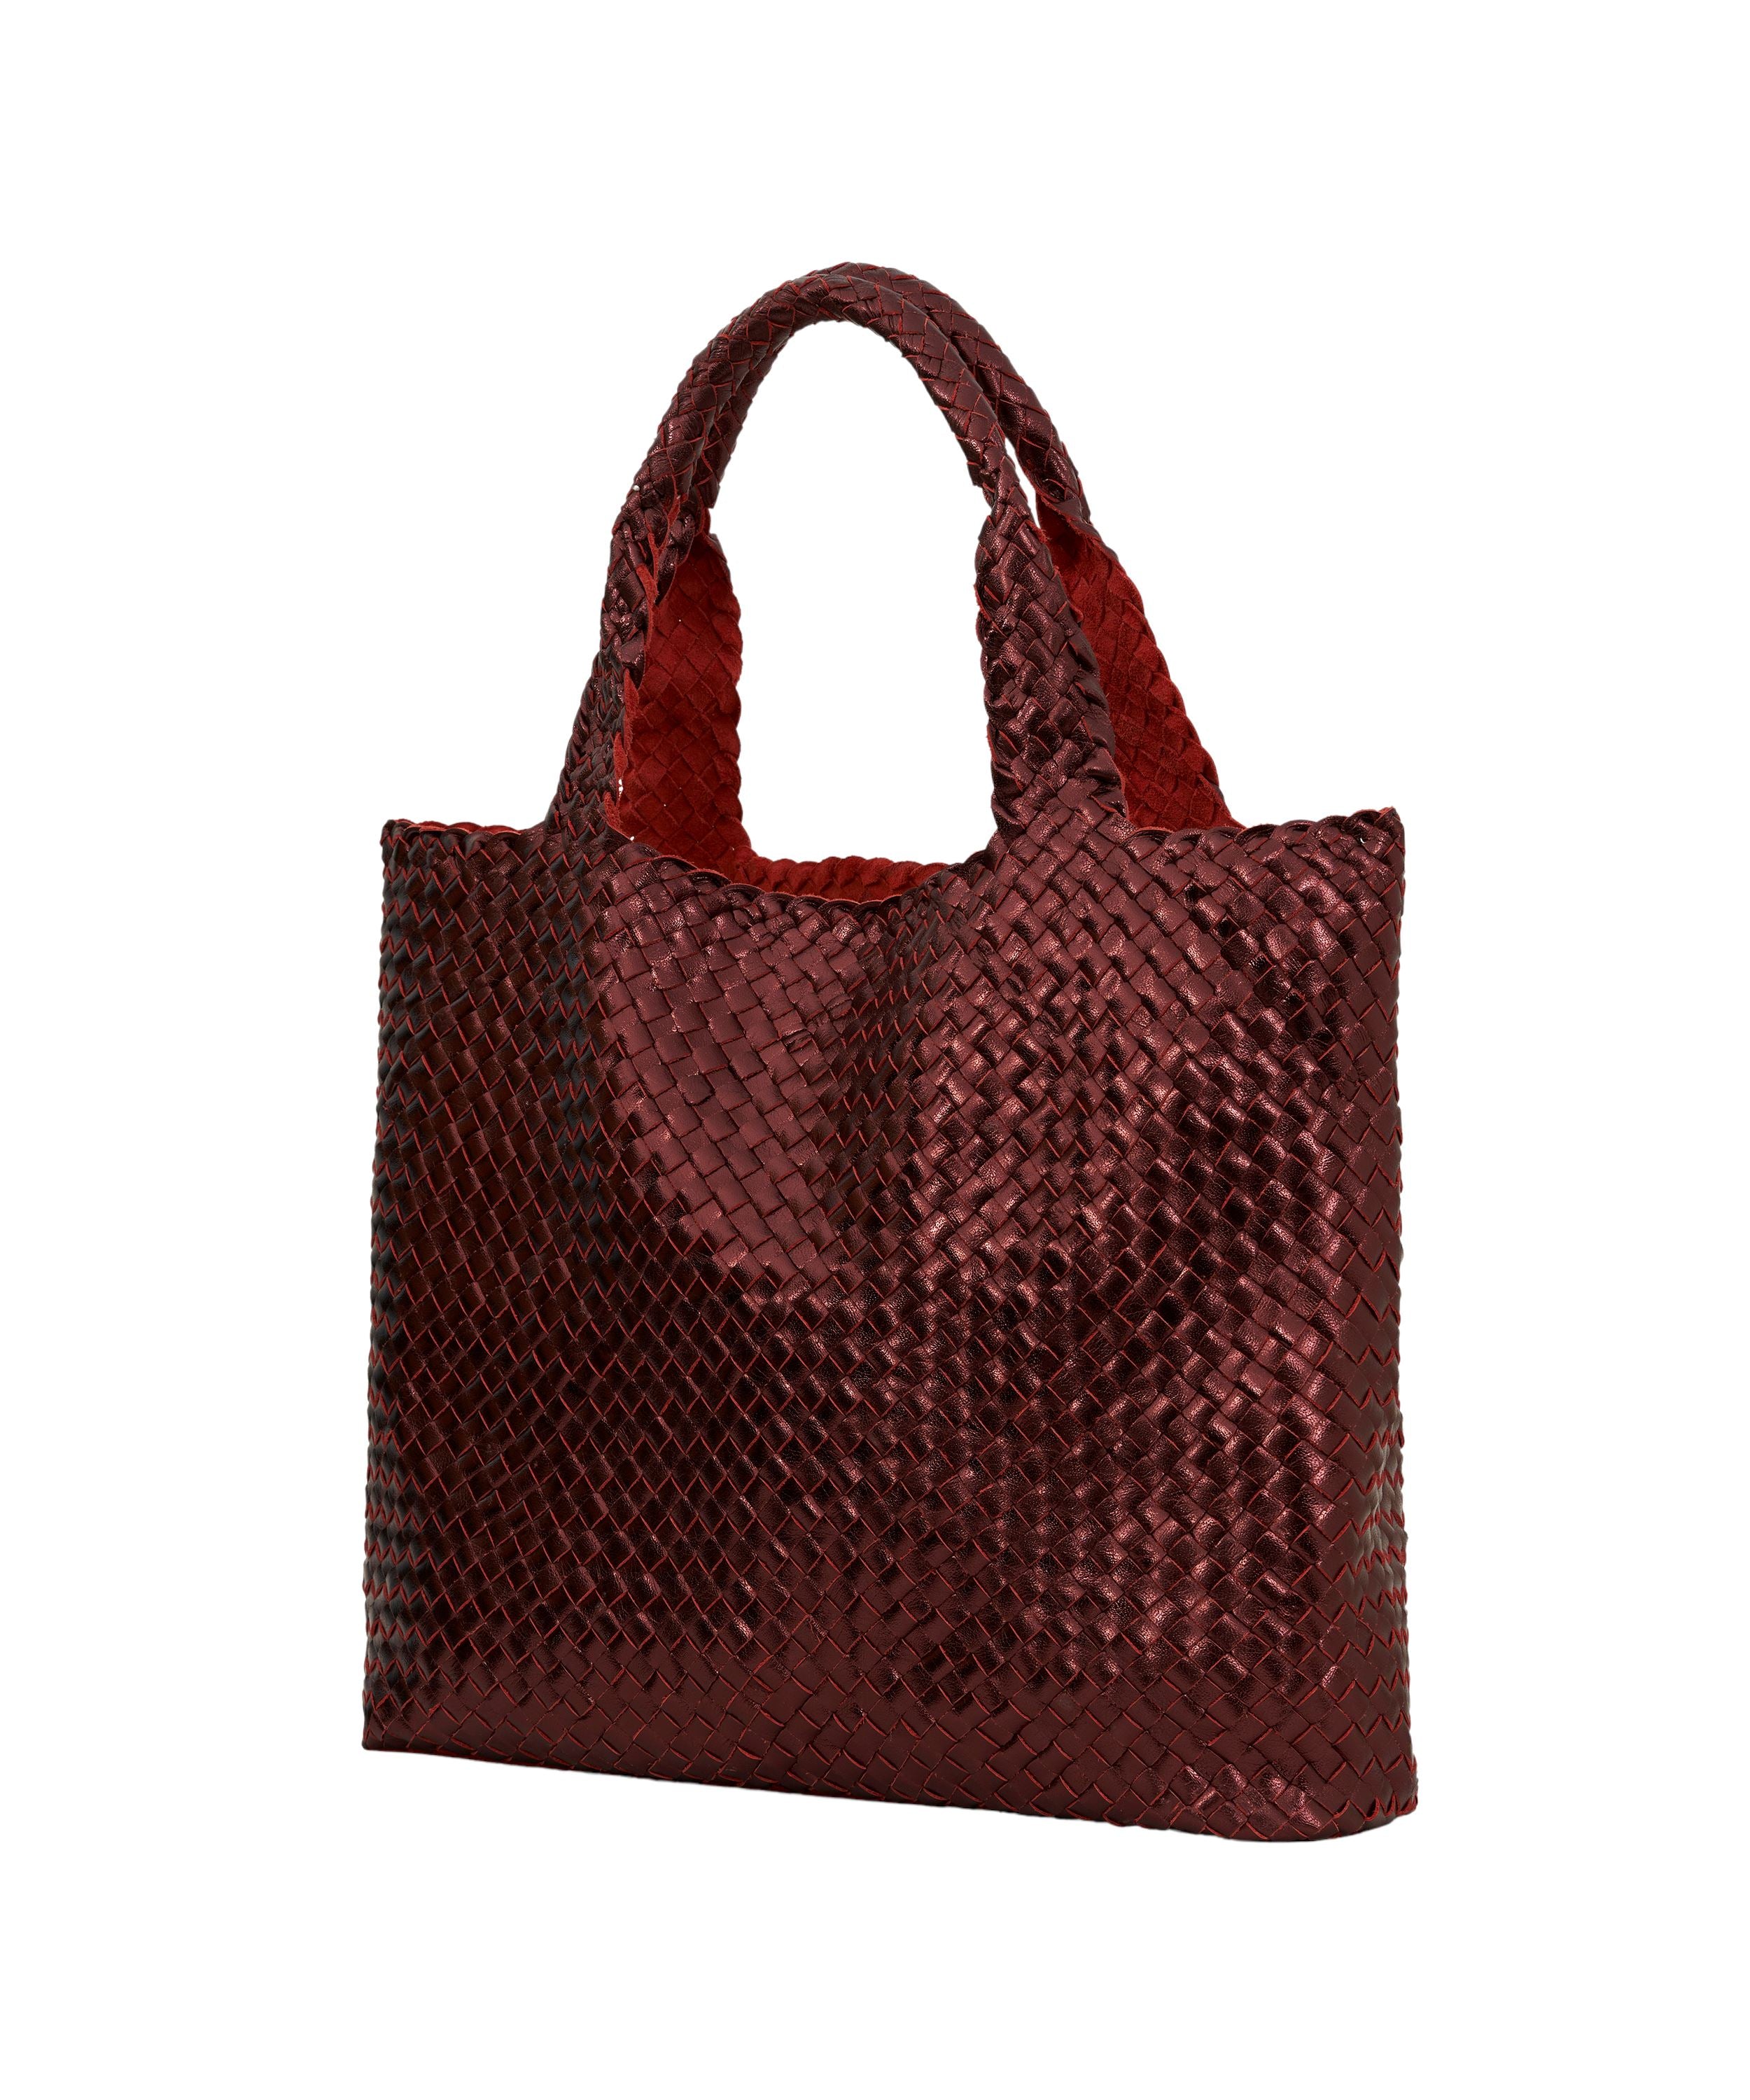 Joie Woven Tote in Metallic Red